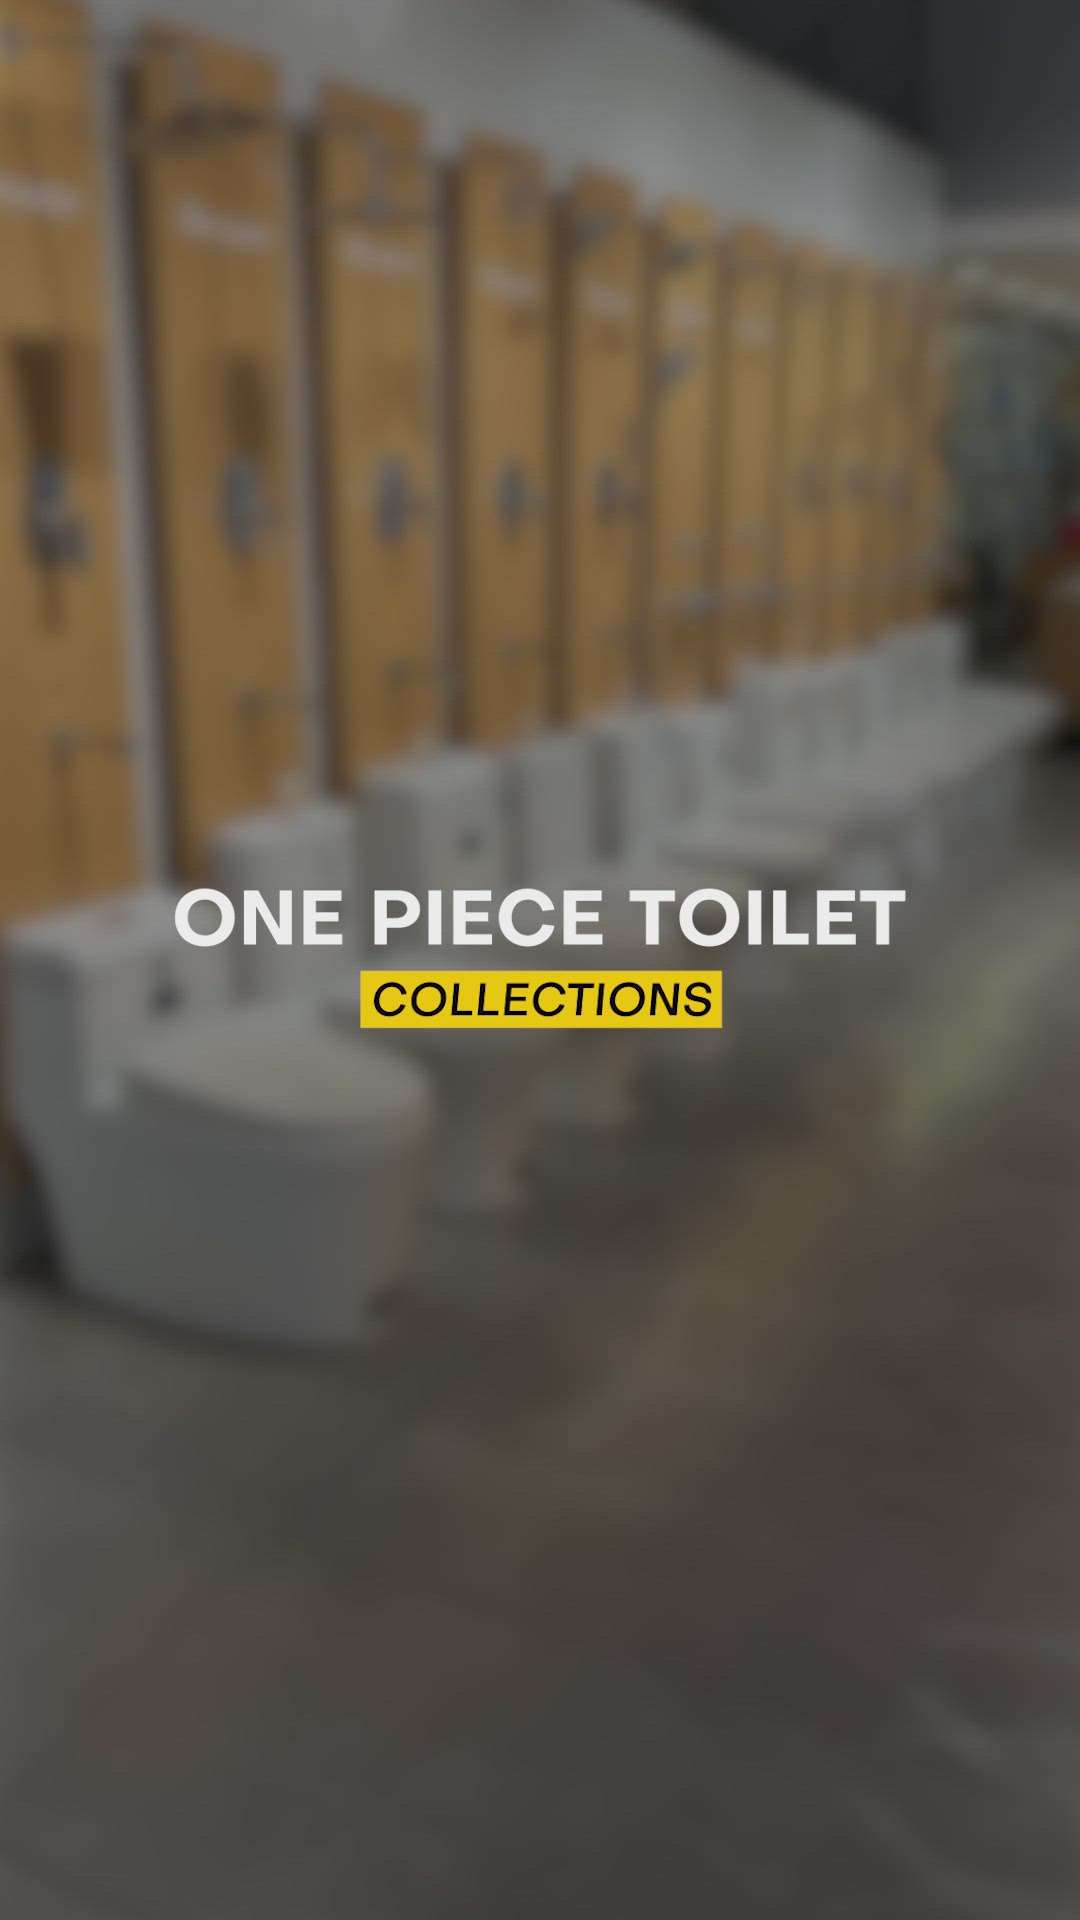 Check out the One Piece Toilet Collections at ABC MyHome 

#ABCMYHome  #Flooring  #Bathroom  #Kitchen 
#BathroomTllesdesign #sanitarywares #sanitary
#sanitaries #abc #abcmyhome #abcmyhomekochi
#abcmyhomealappuzha